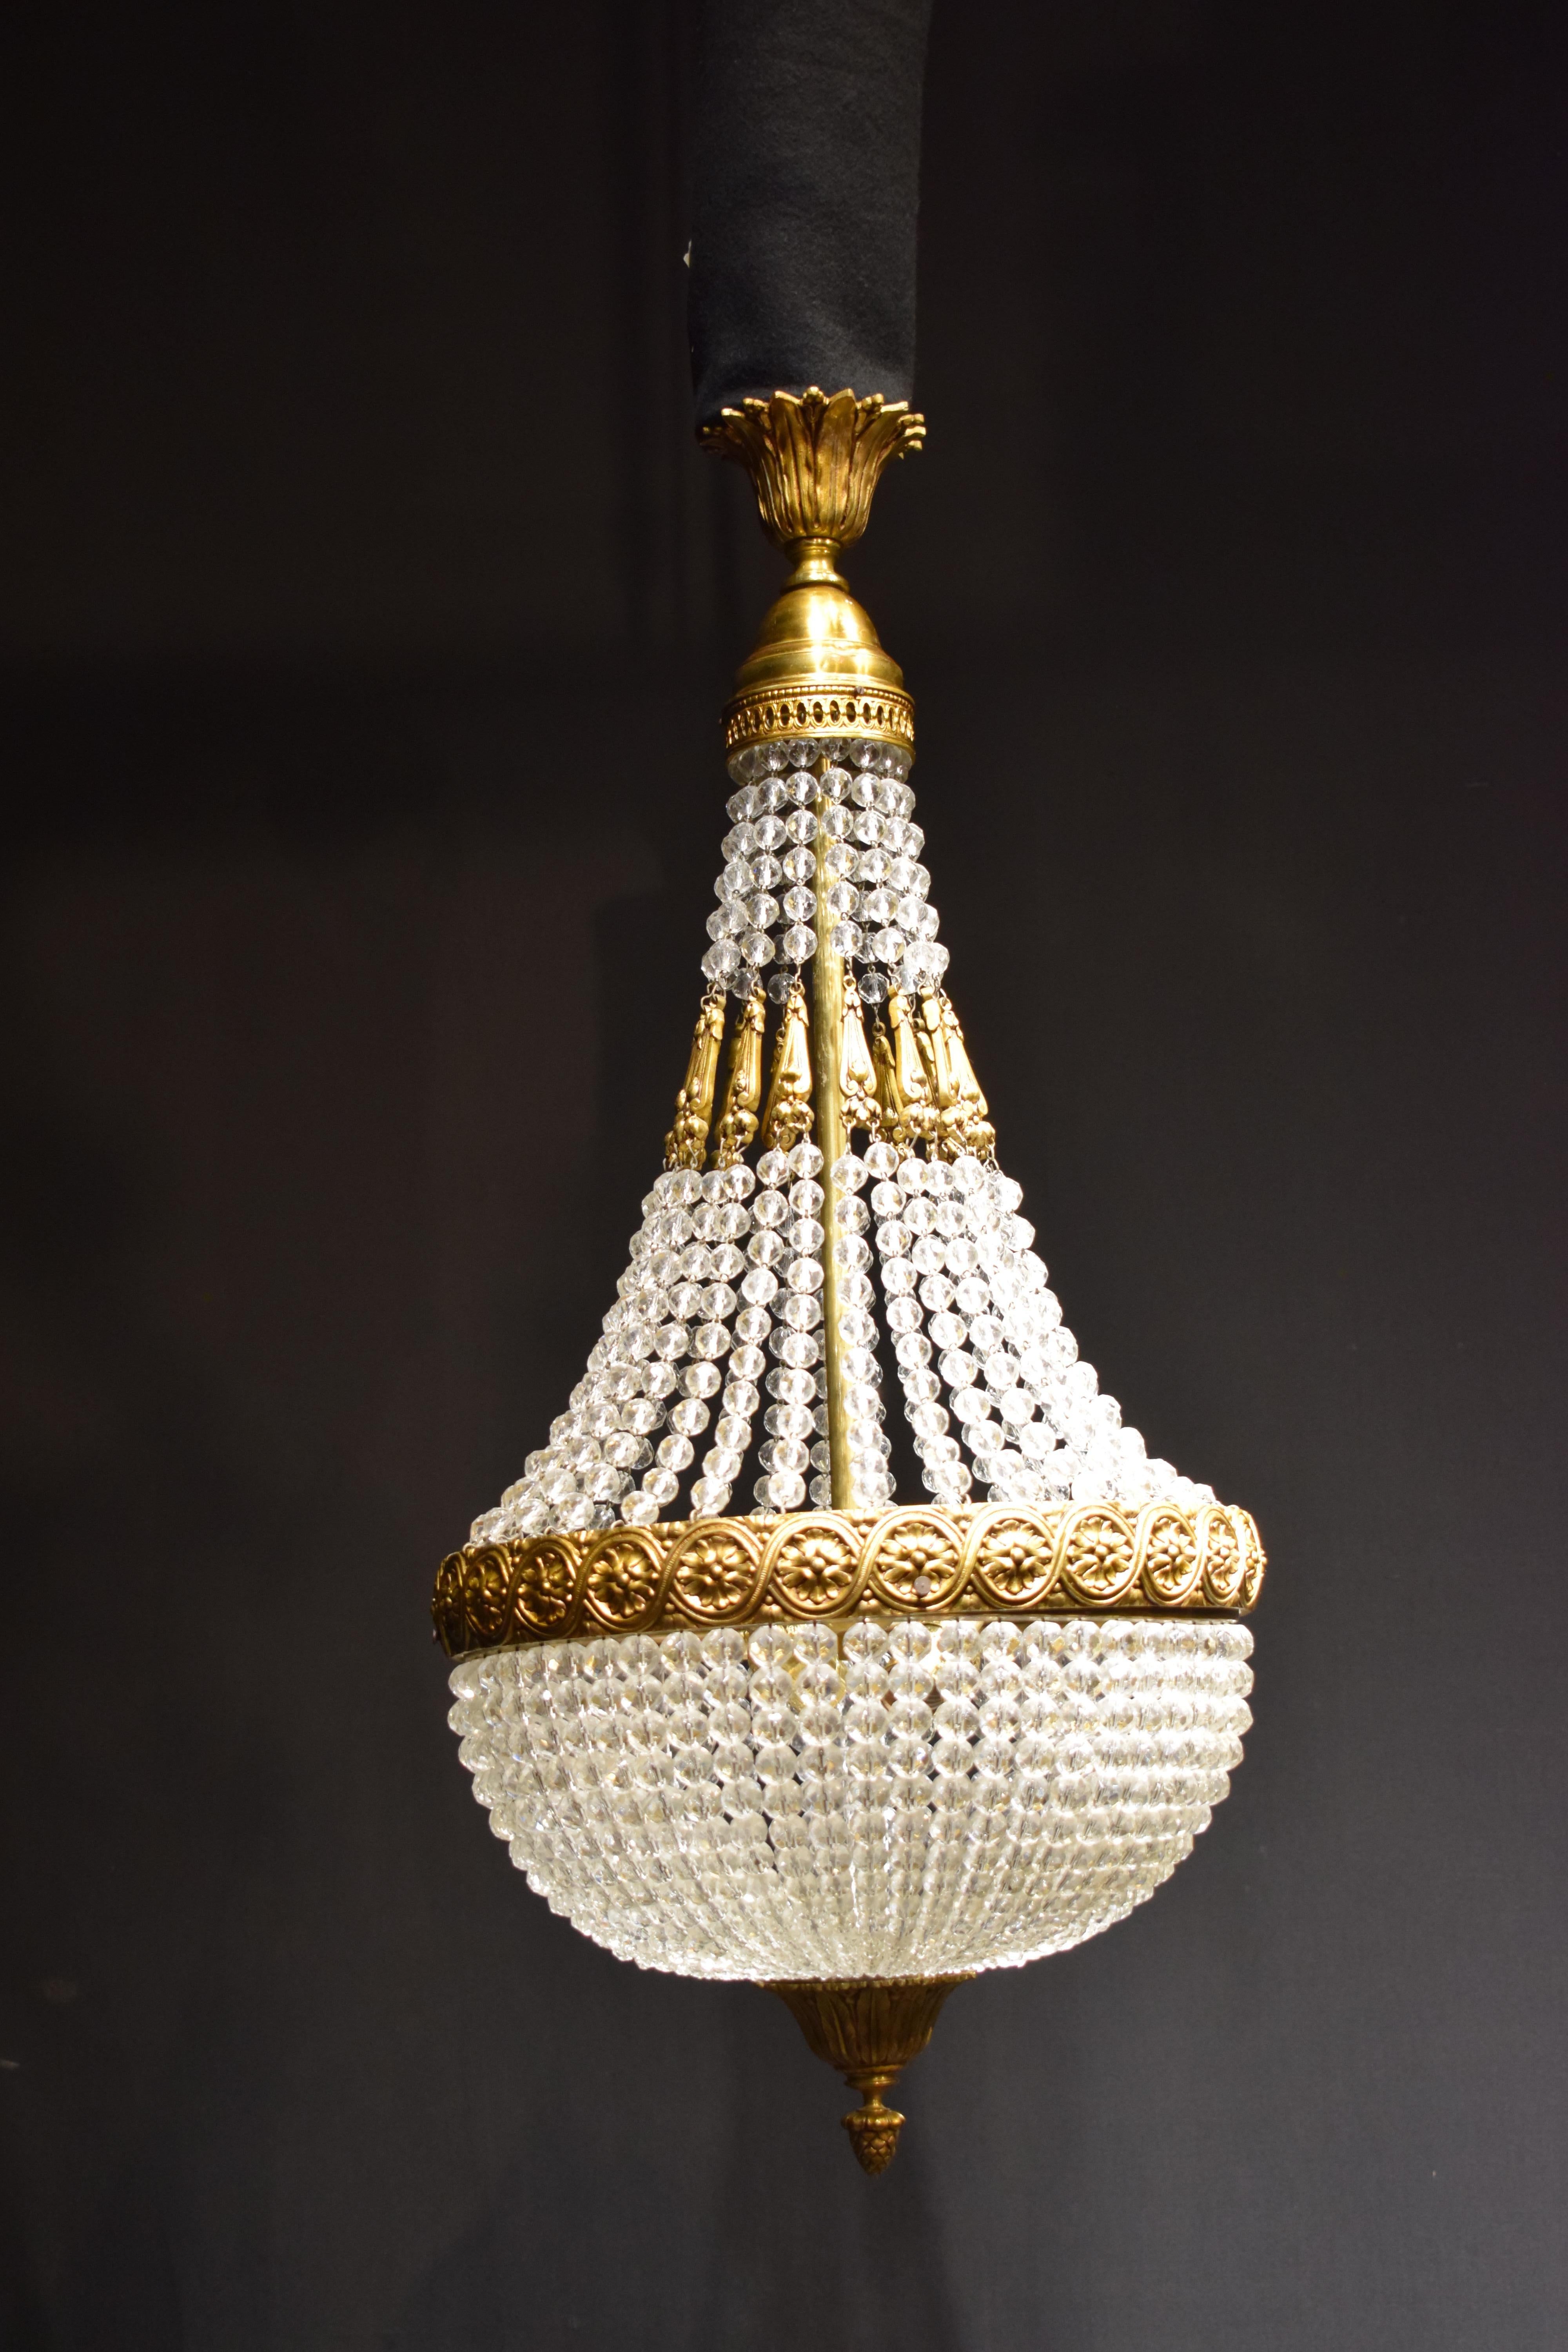 A fine & elegant gilt bronze & crystal basket chandelier. High quality bronze work. Hand cut graduated faceted beads. 2 Lights. France, circa 1930.
Dimensions: height 32